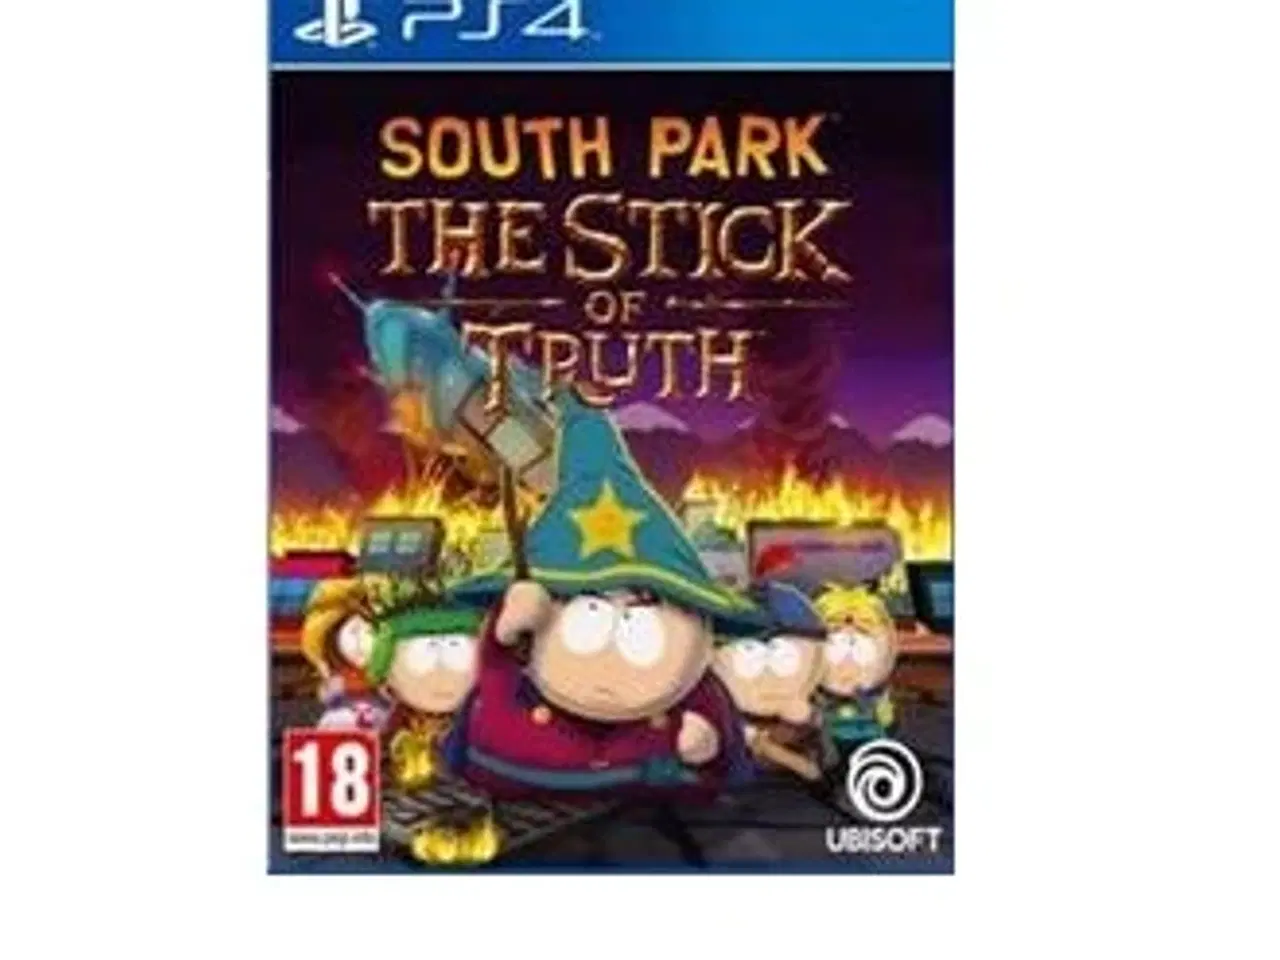 Billede 1 - South Park: The Stick of Truth HD